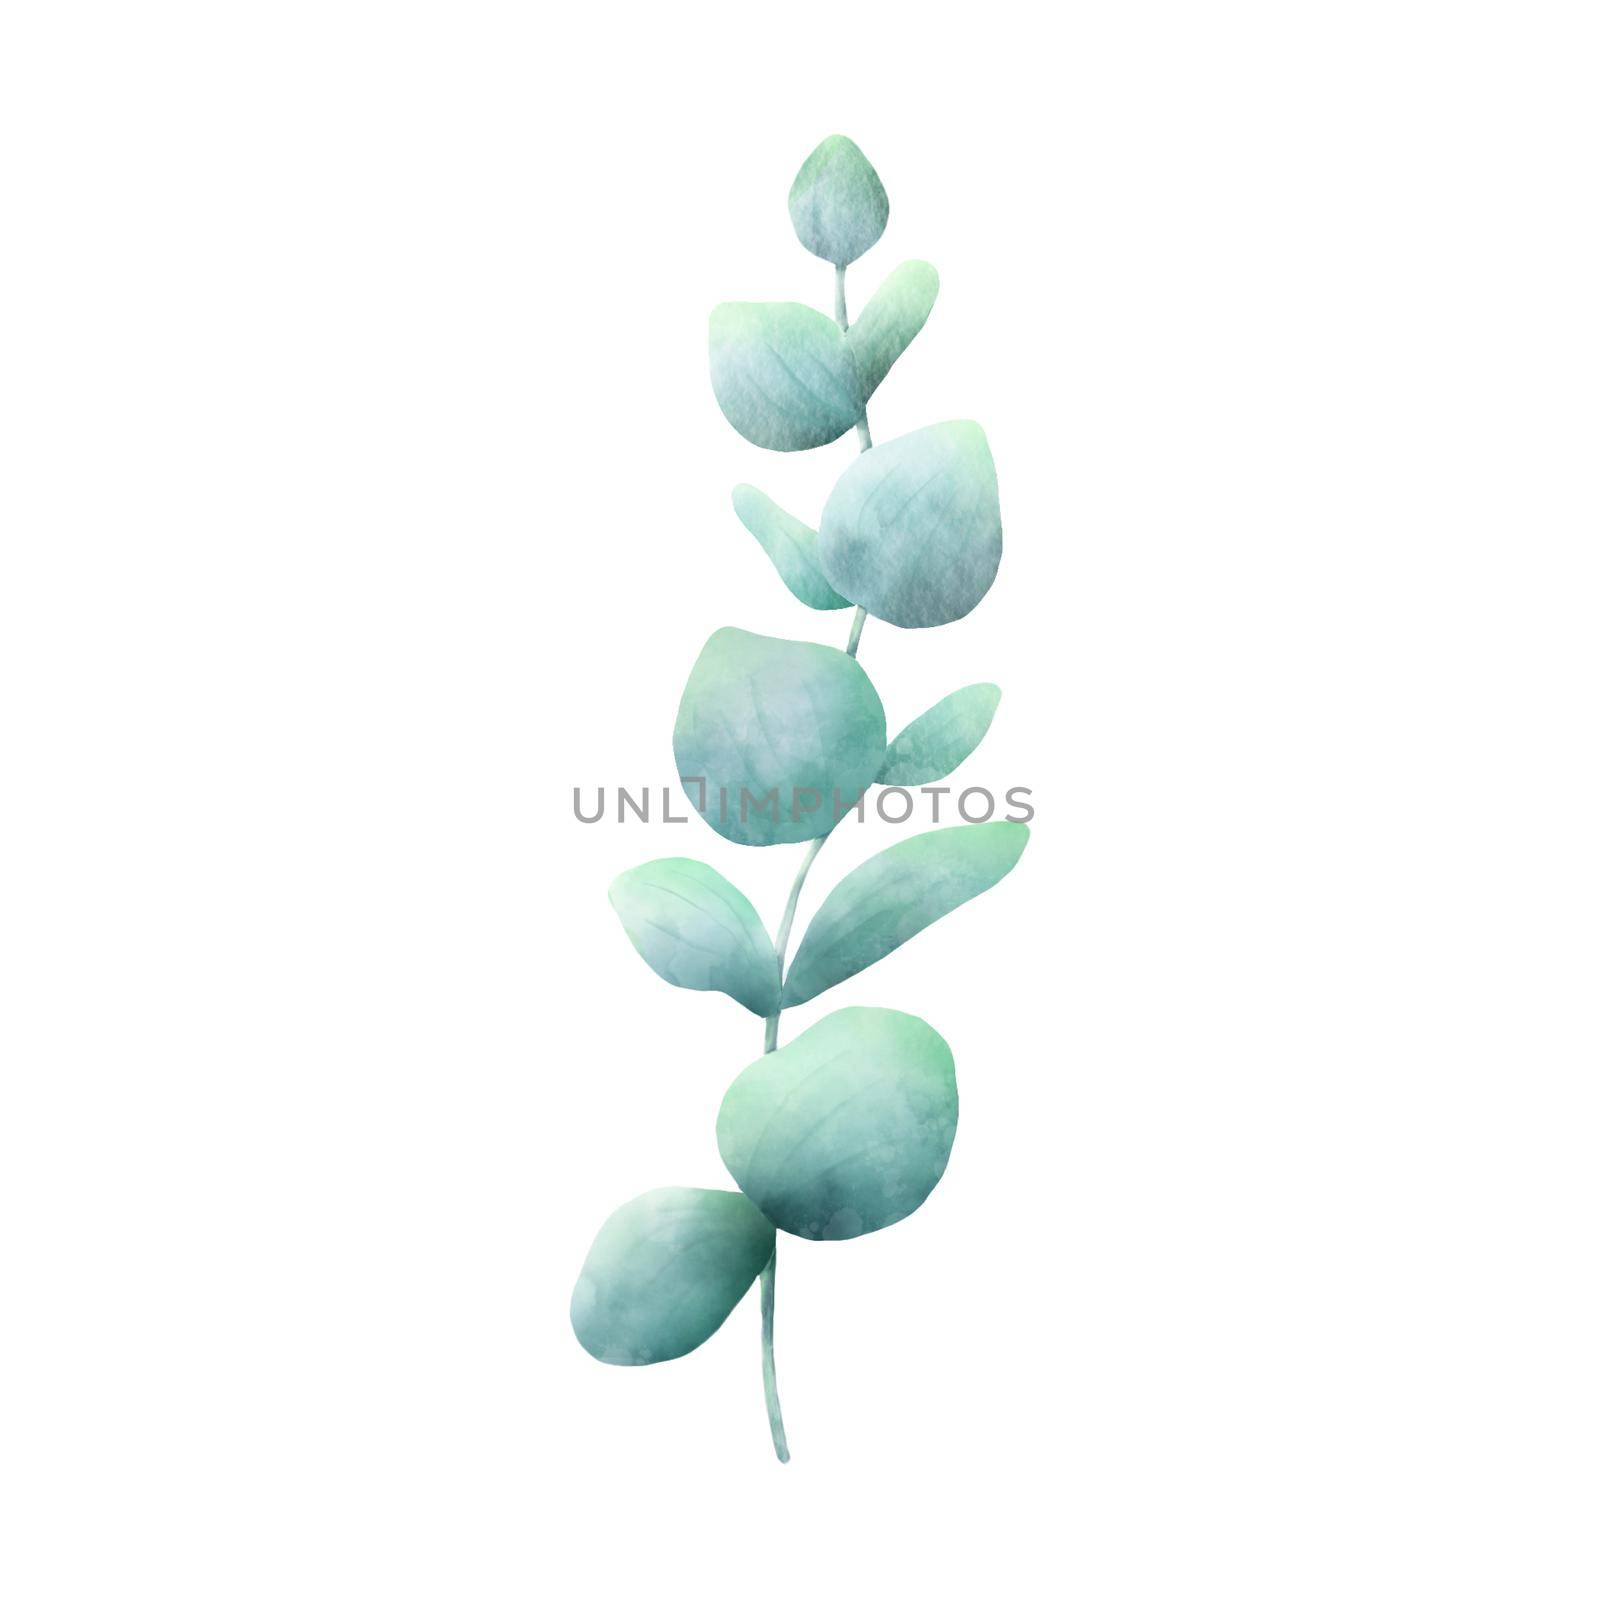 Watercolor Eucaliptus branch drawing. Hand drawn illustration with eucalyptus leaves isolated on white background. Floral herbal image of green plant